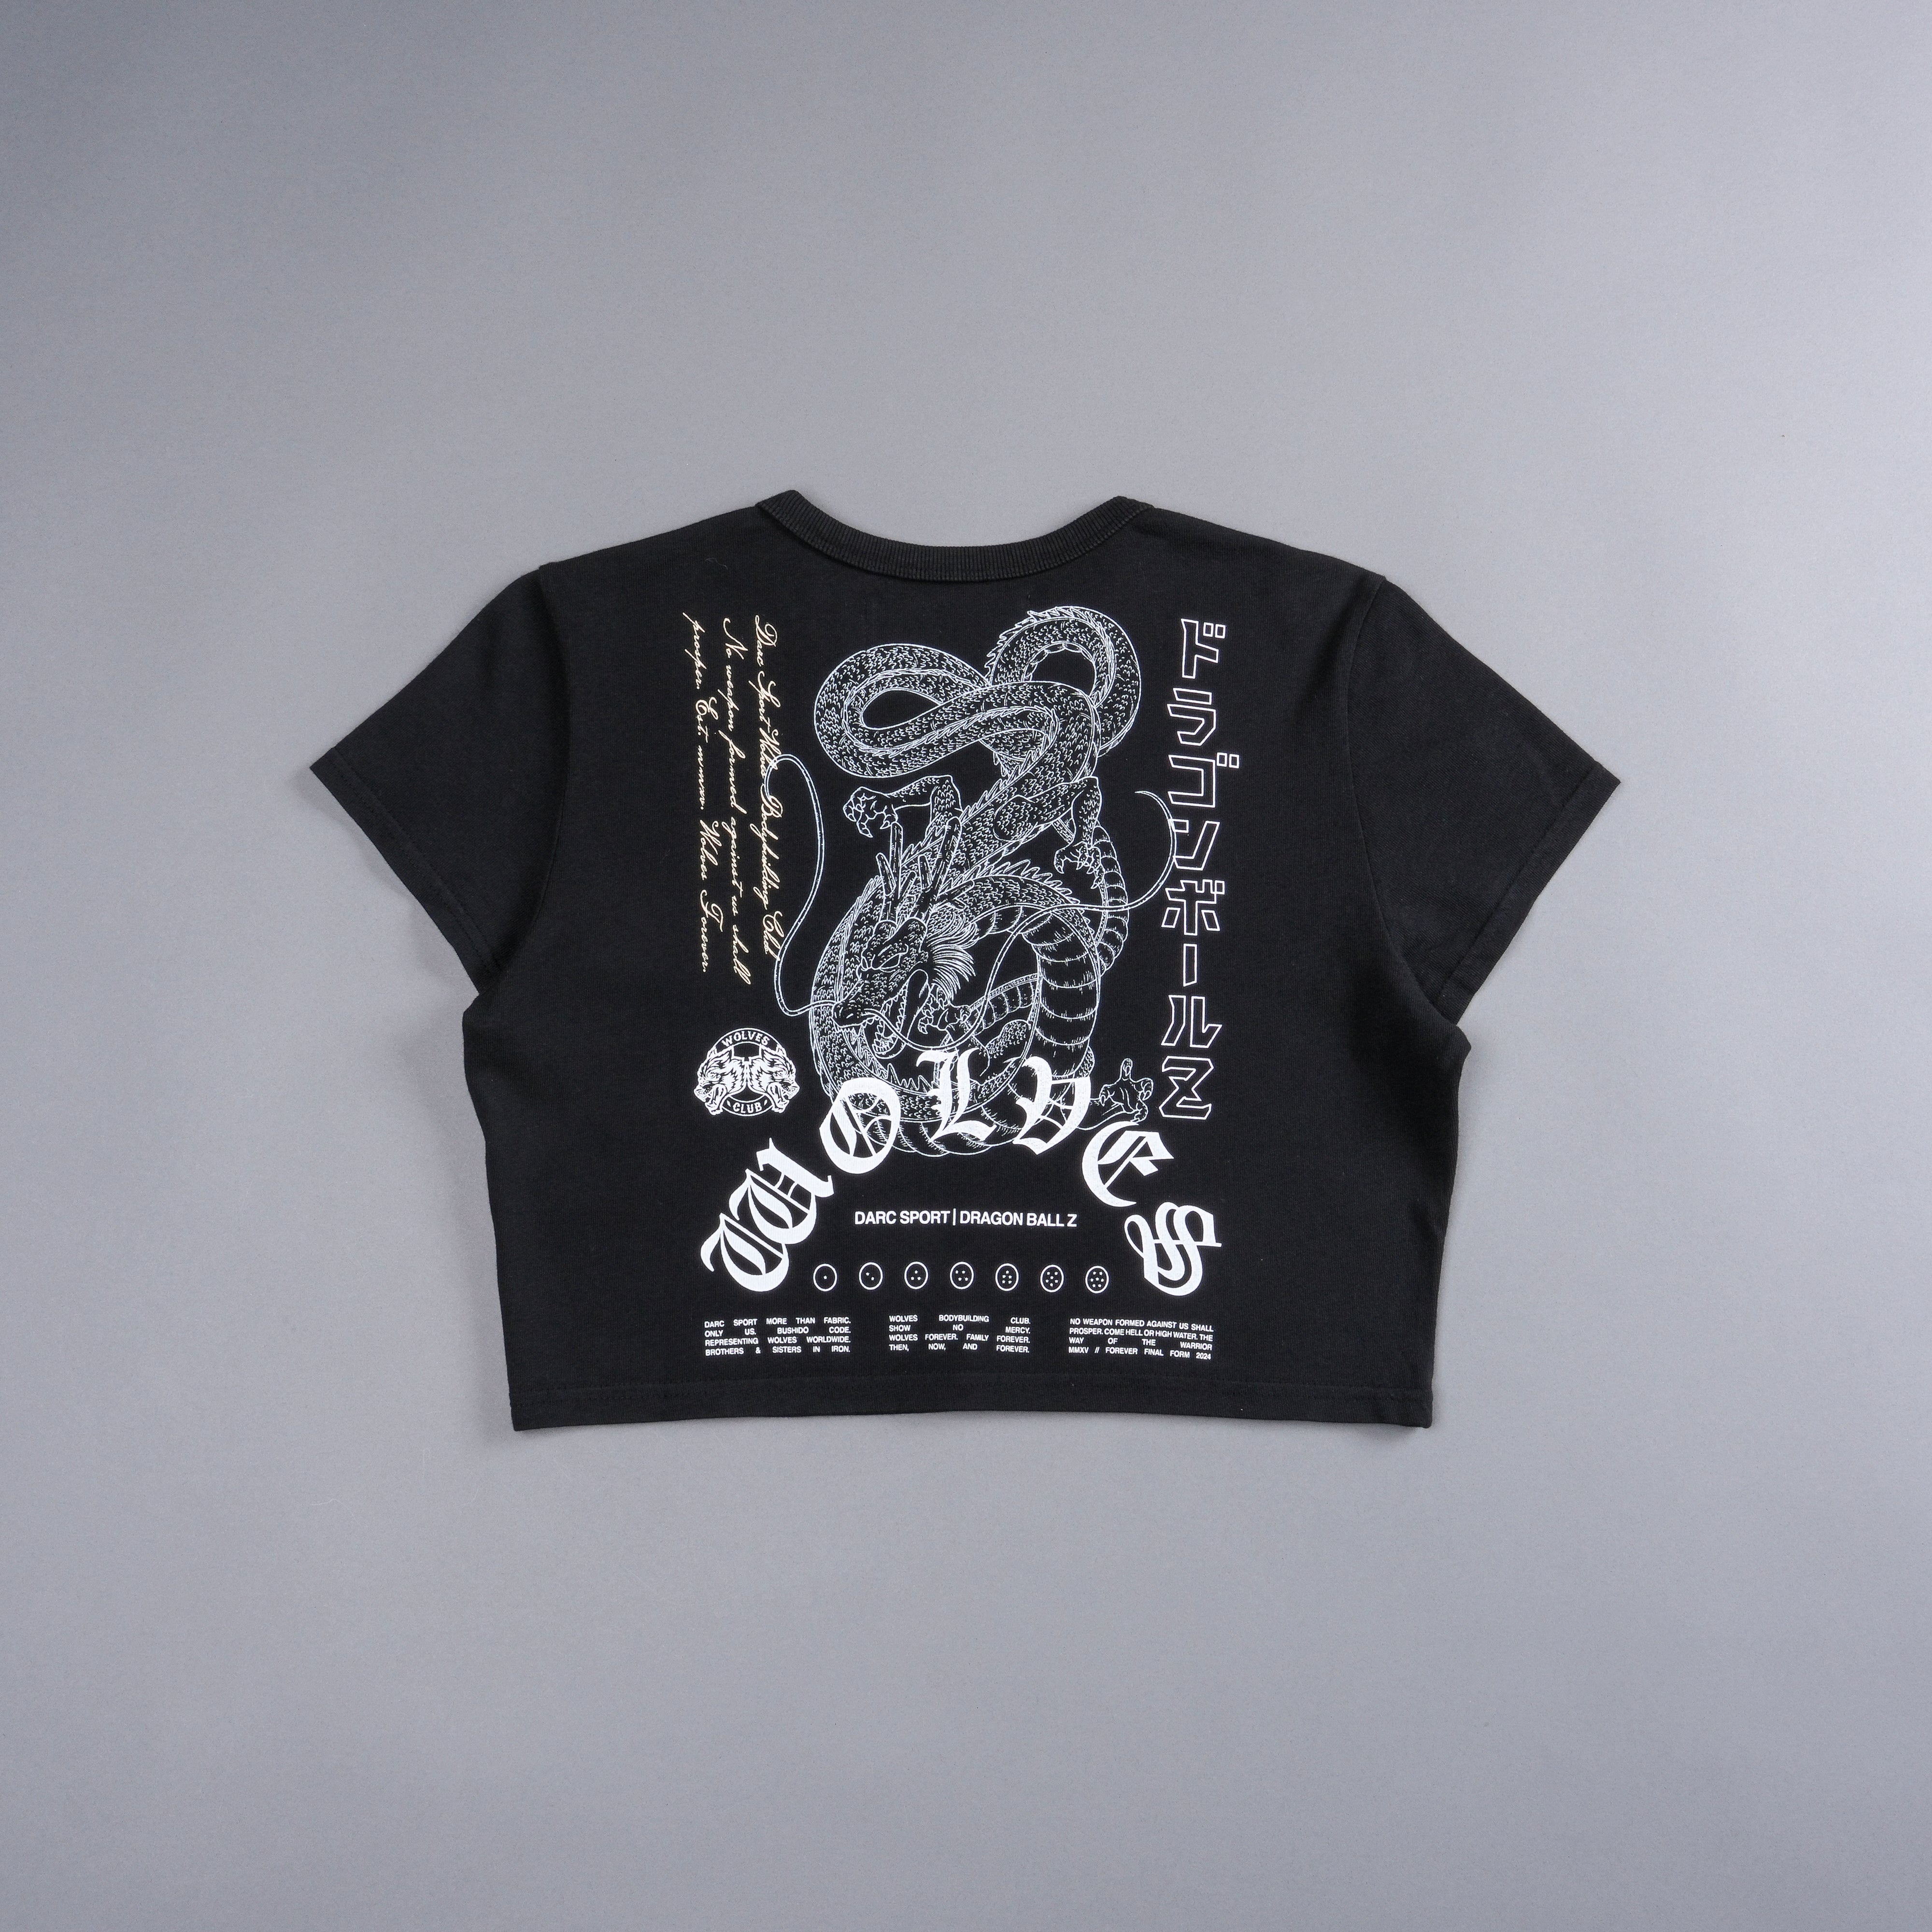 The Dragon & The Wolf "Timeless" (Cropped) Tee in Black